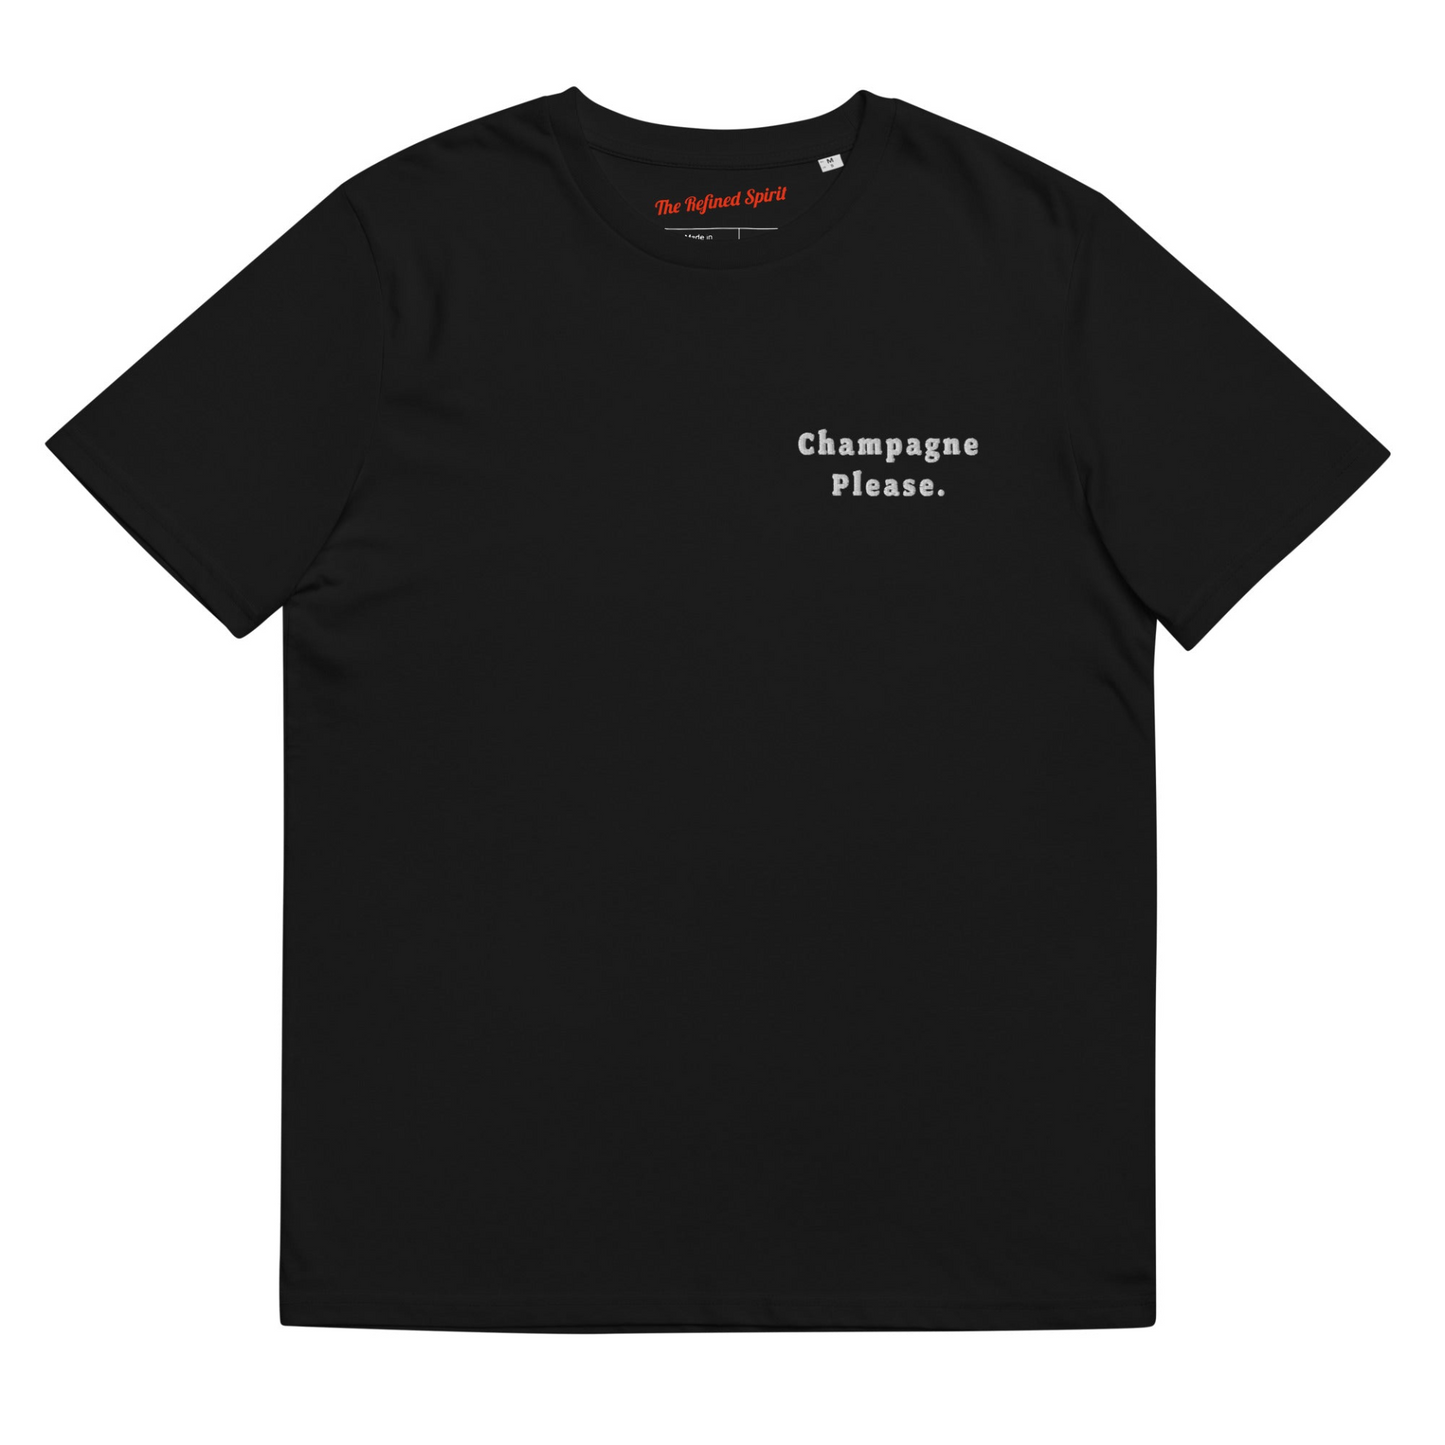 Champagne Please - Organic Embroidered T-shirt